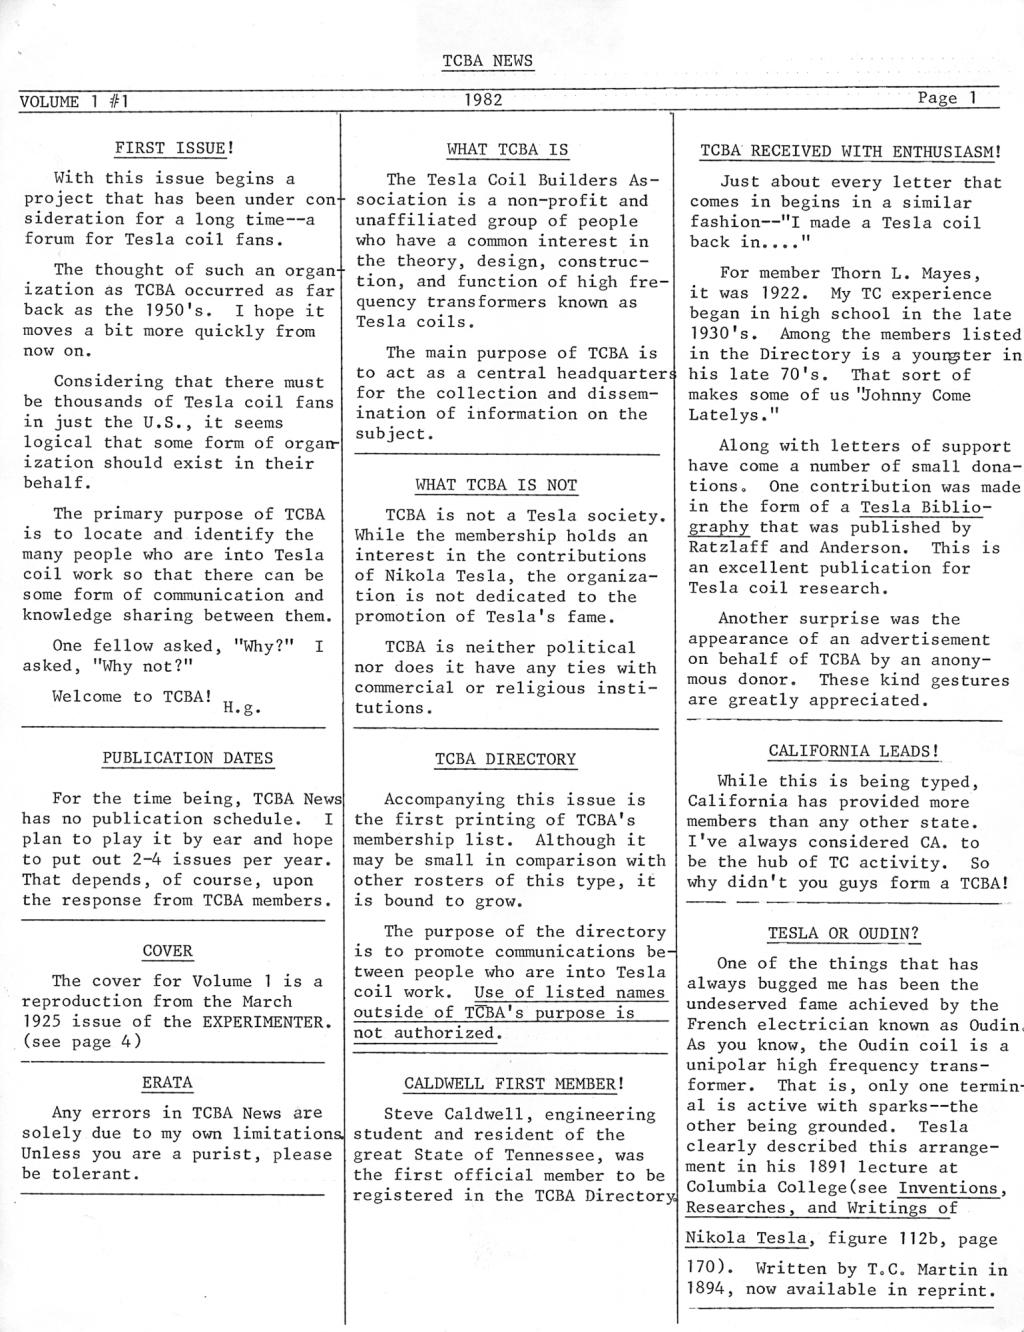 TCBA Volume 1 - Issue 1 - Page 1 of 8